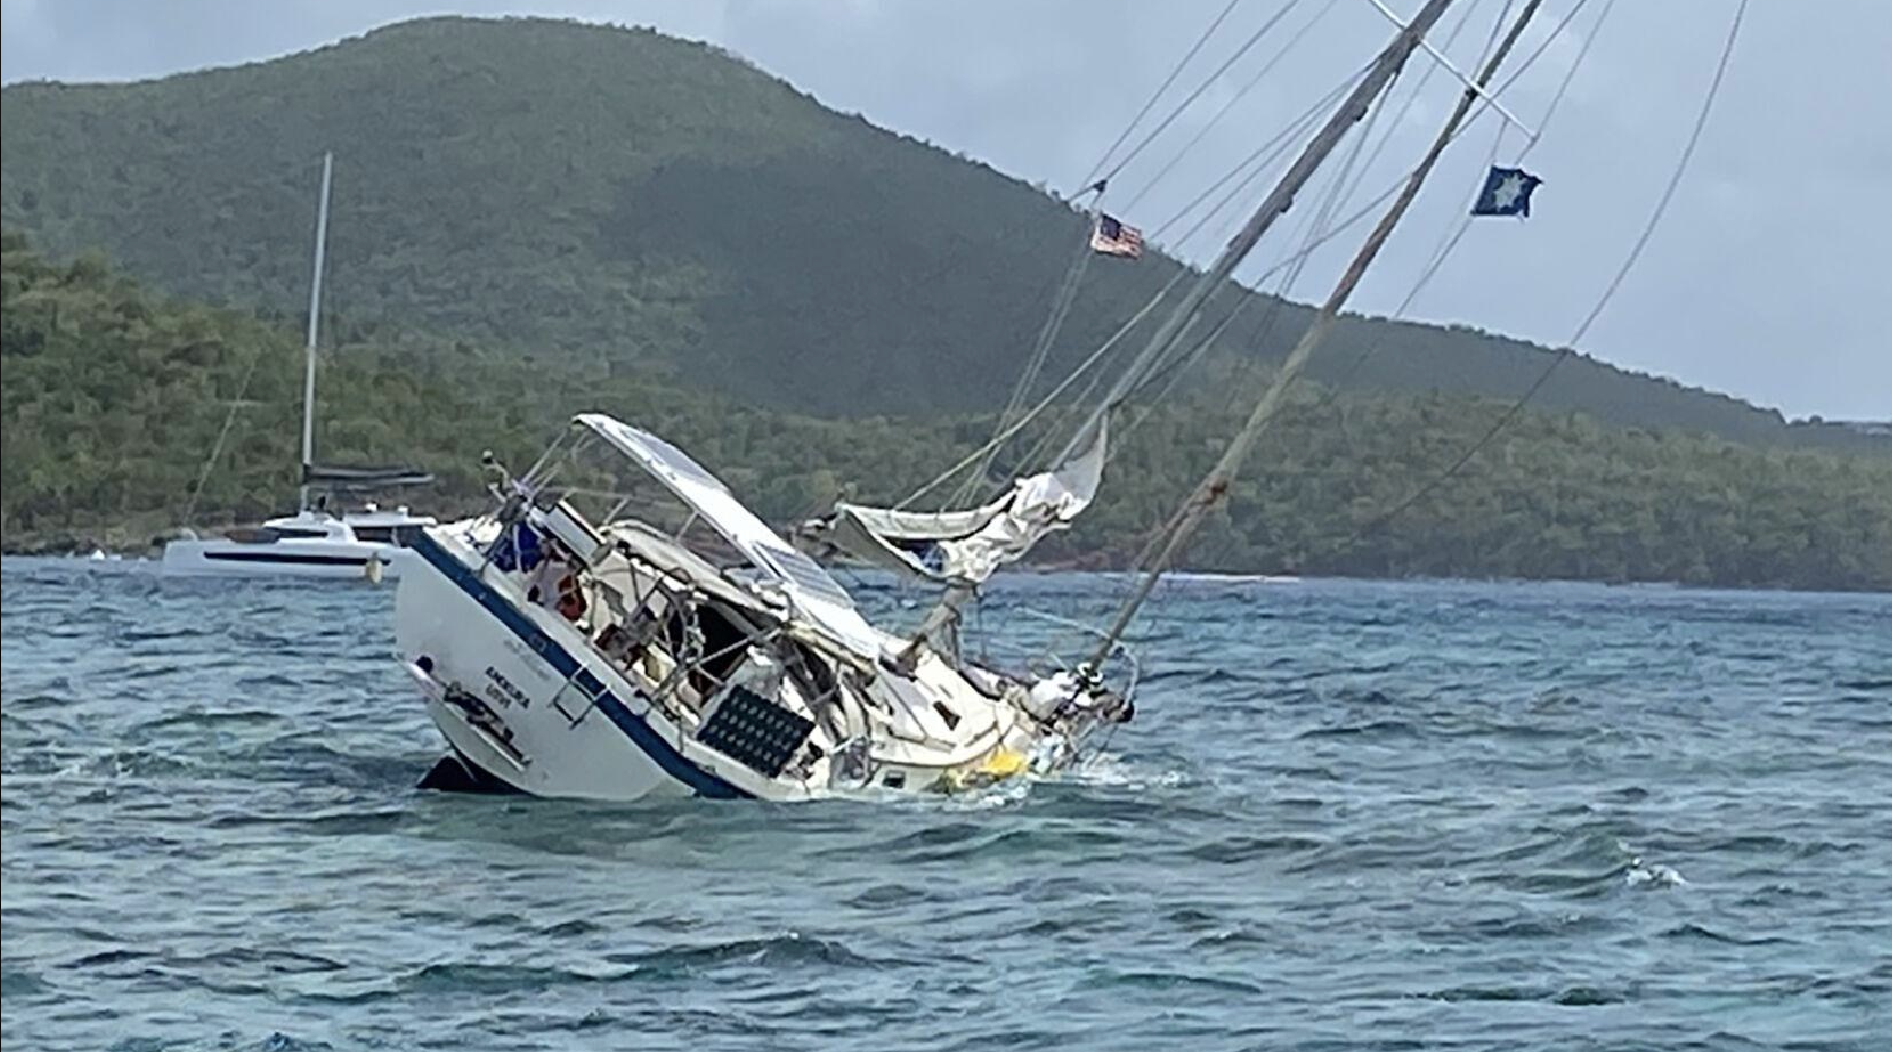 The 42-foot Amokura lists after grounding on July 7 at Johnson’s Reef off St. John. (Coast Guard photo)